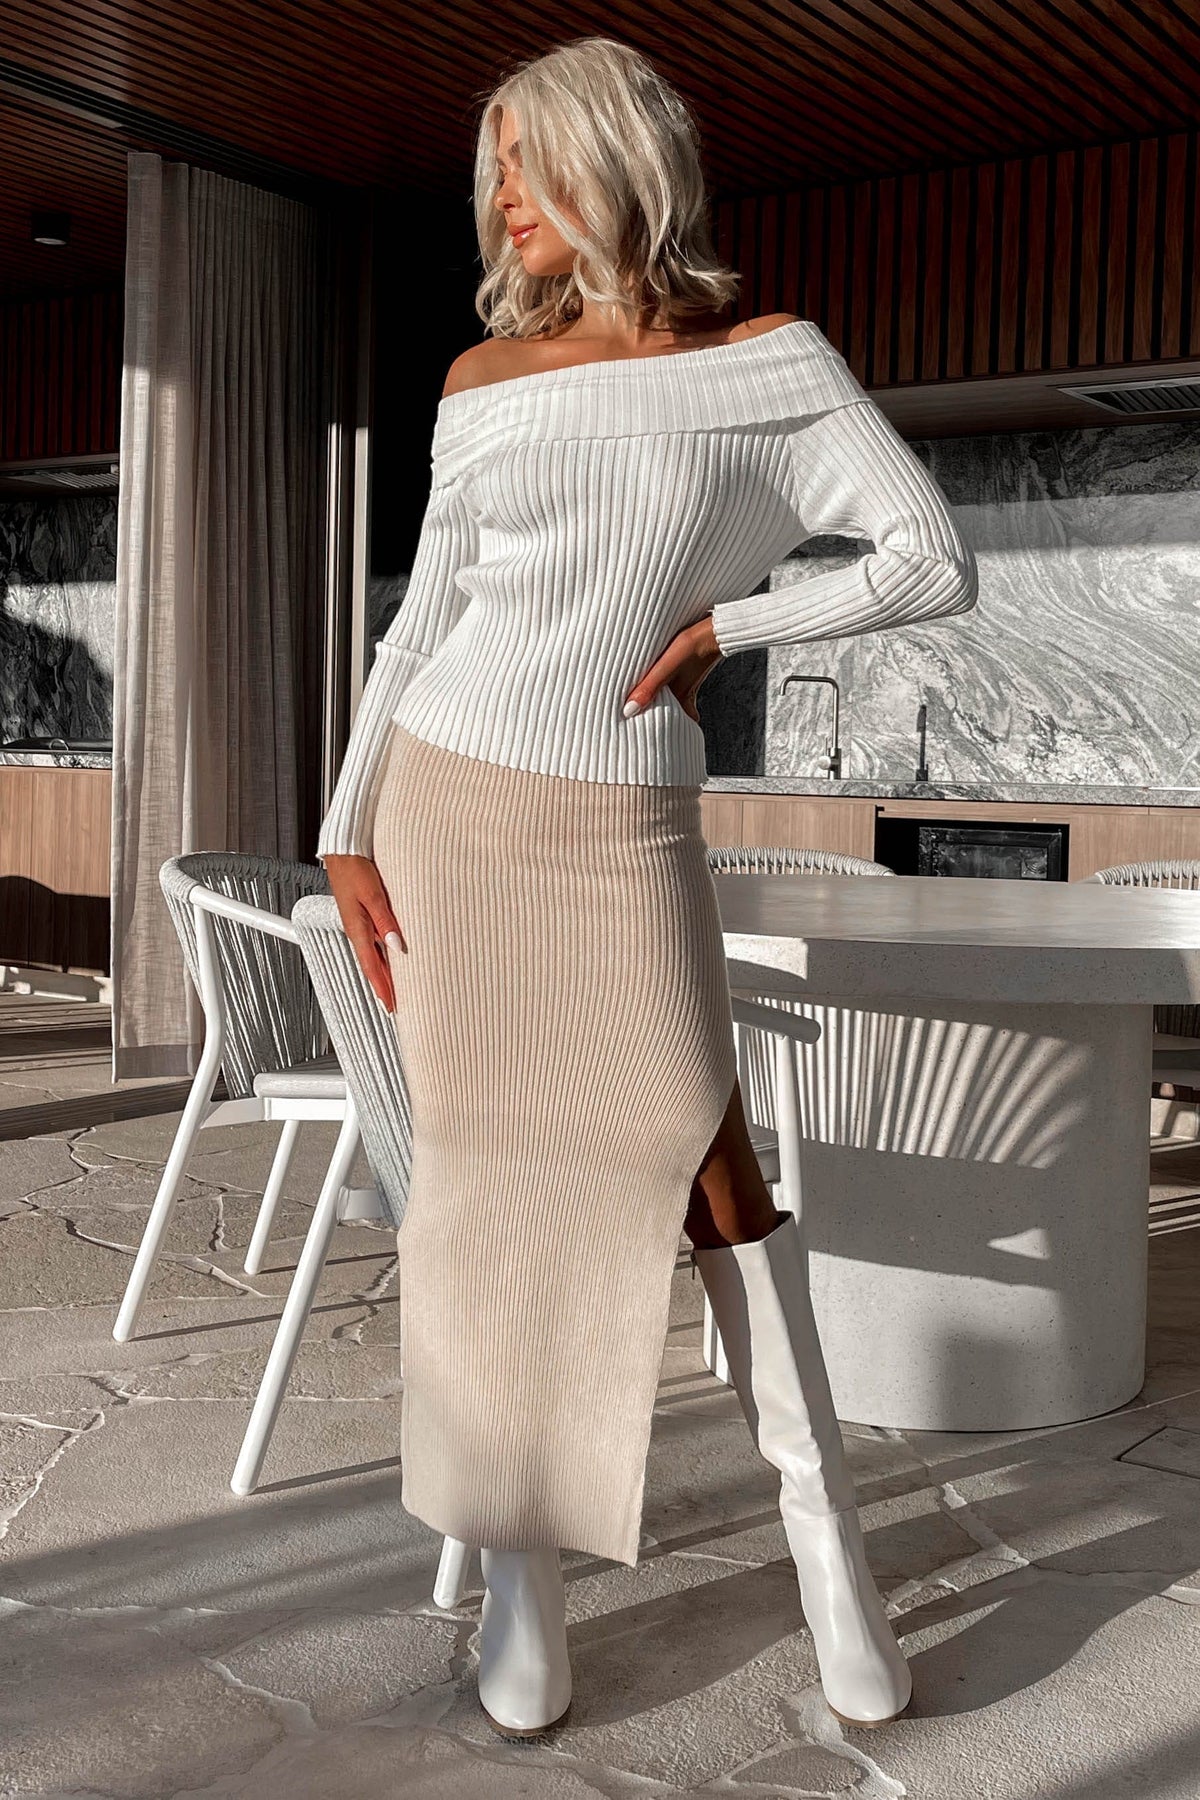 Beylinda Top, ACRYLIC &amp; NYLON &amp; POLYESTER, ACRYLIC AND NYLON AND POLYESTER, KNIT, KNITS, KNITTED, KNITWEAR, LONG SLEEVE, new arrivals, OFF SHOULDER, TOP, TOPS, WHITE, , -MISHKAH